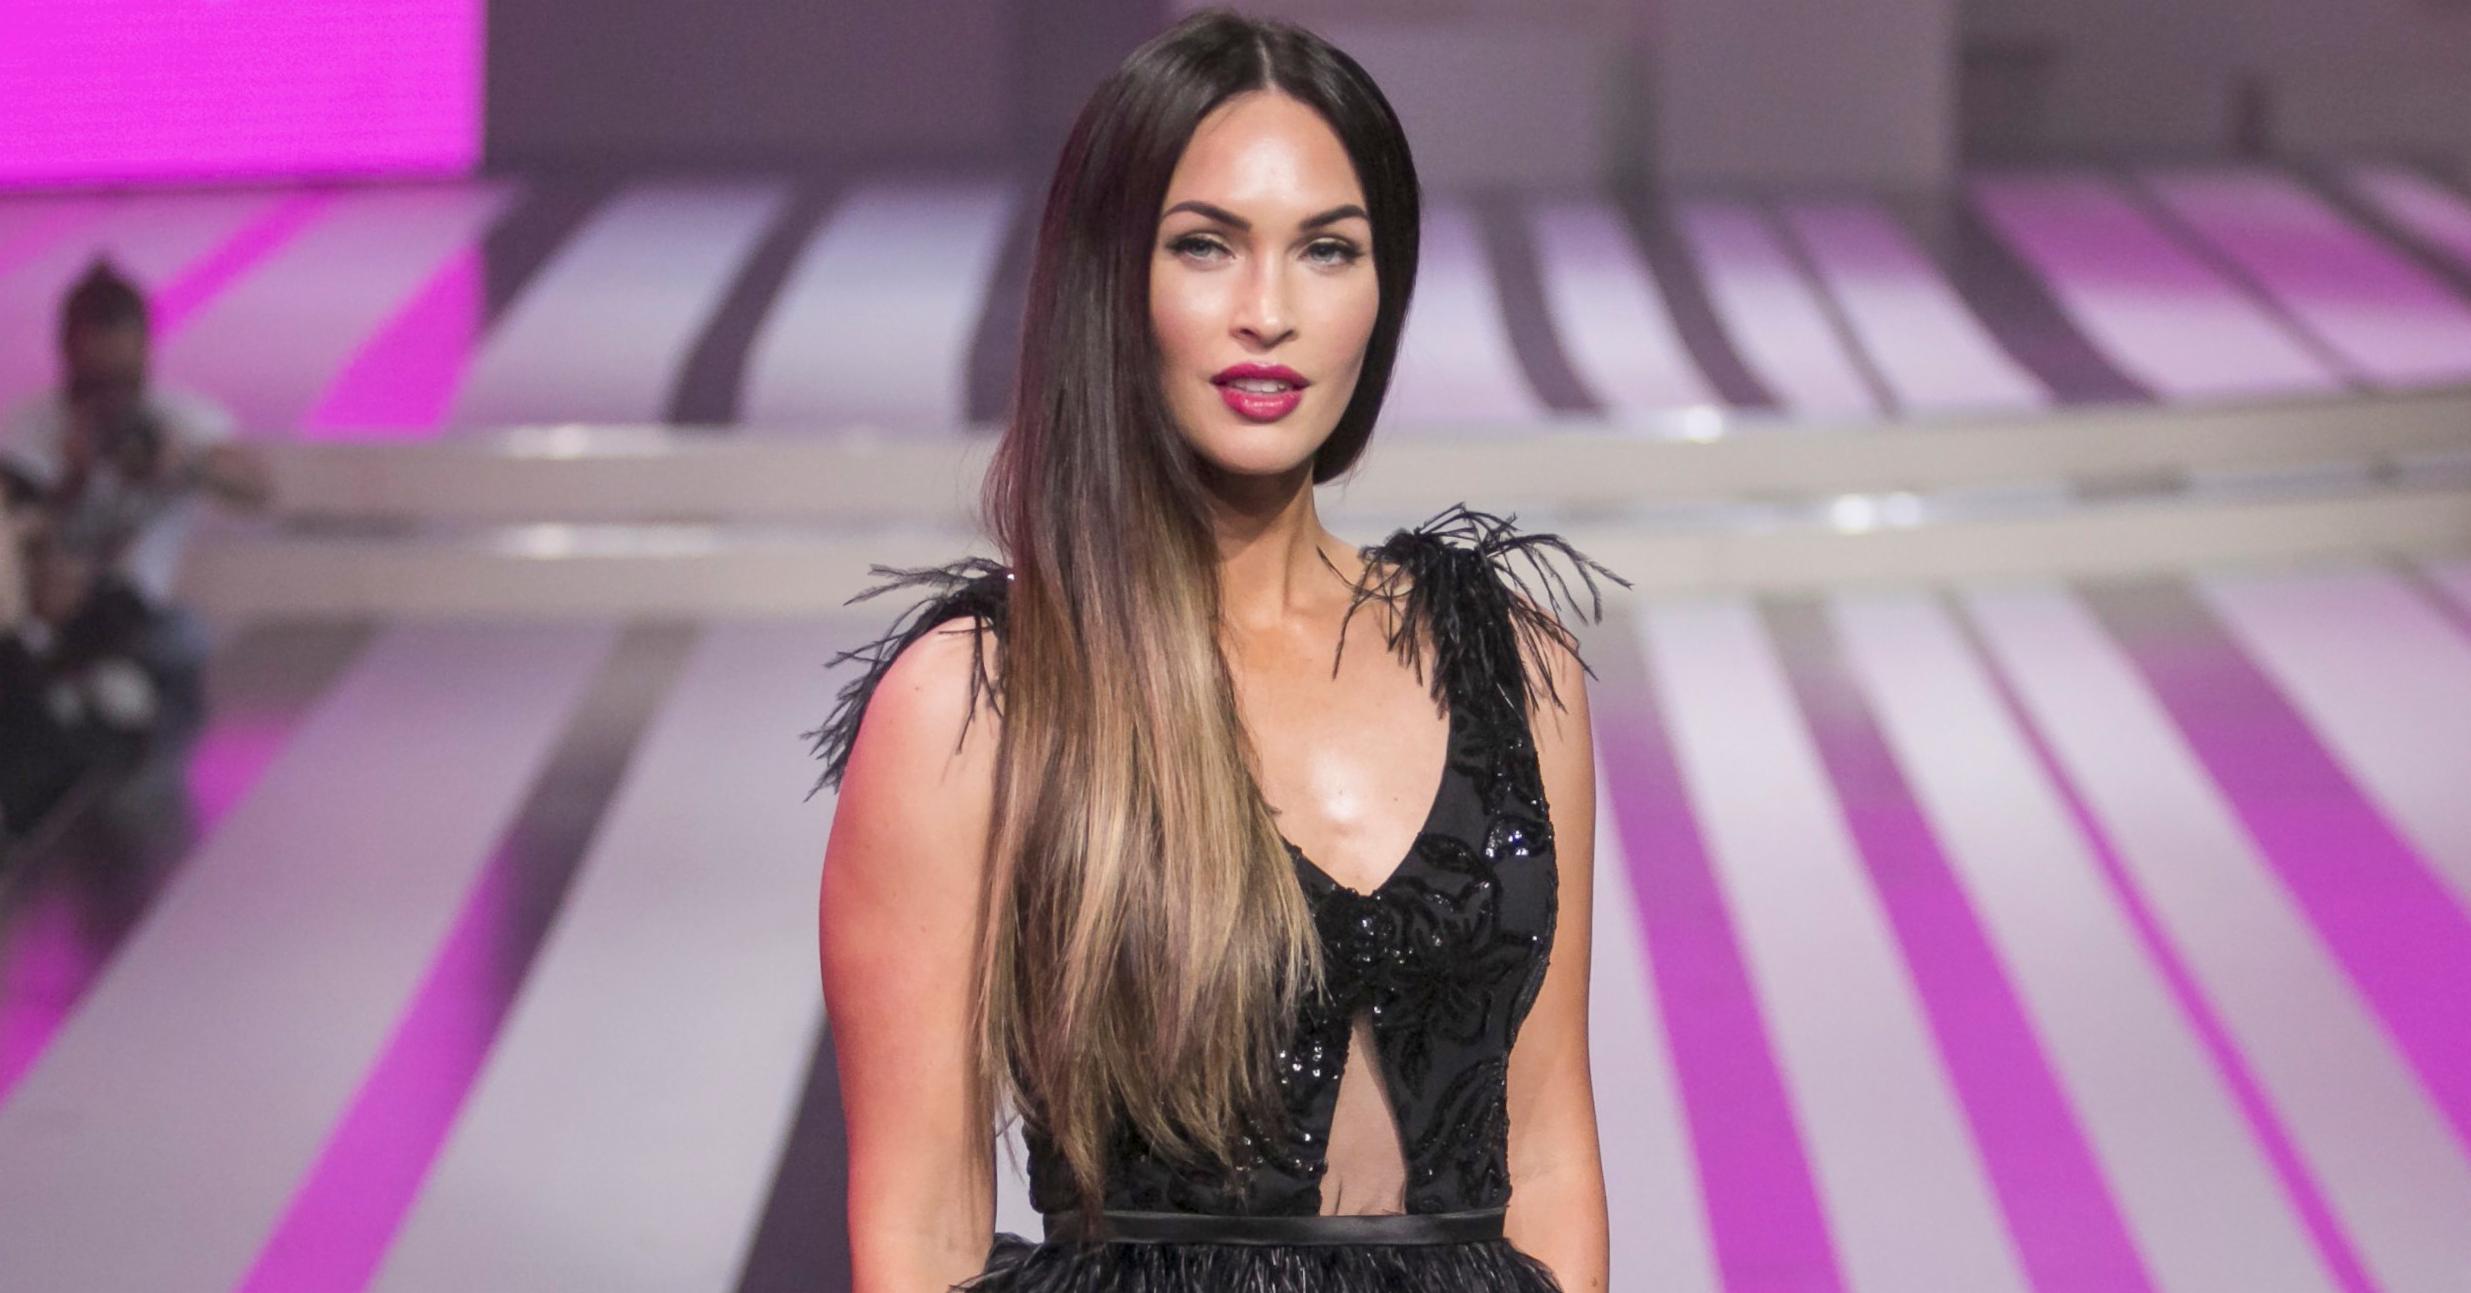 Megan Fox Celebrates Bisexuality By Sharing Sultry Pride Selfies - Maxim